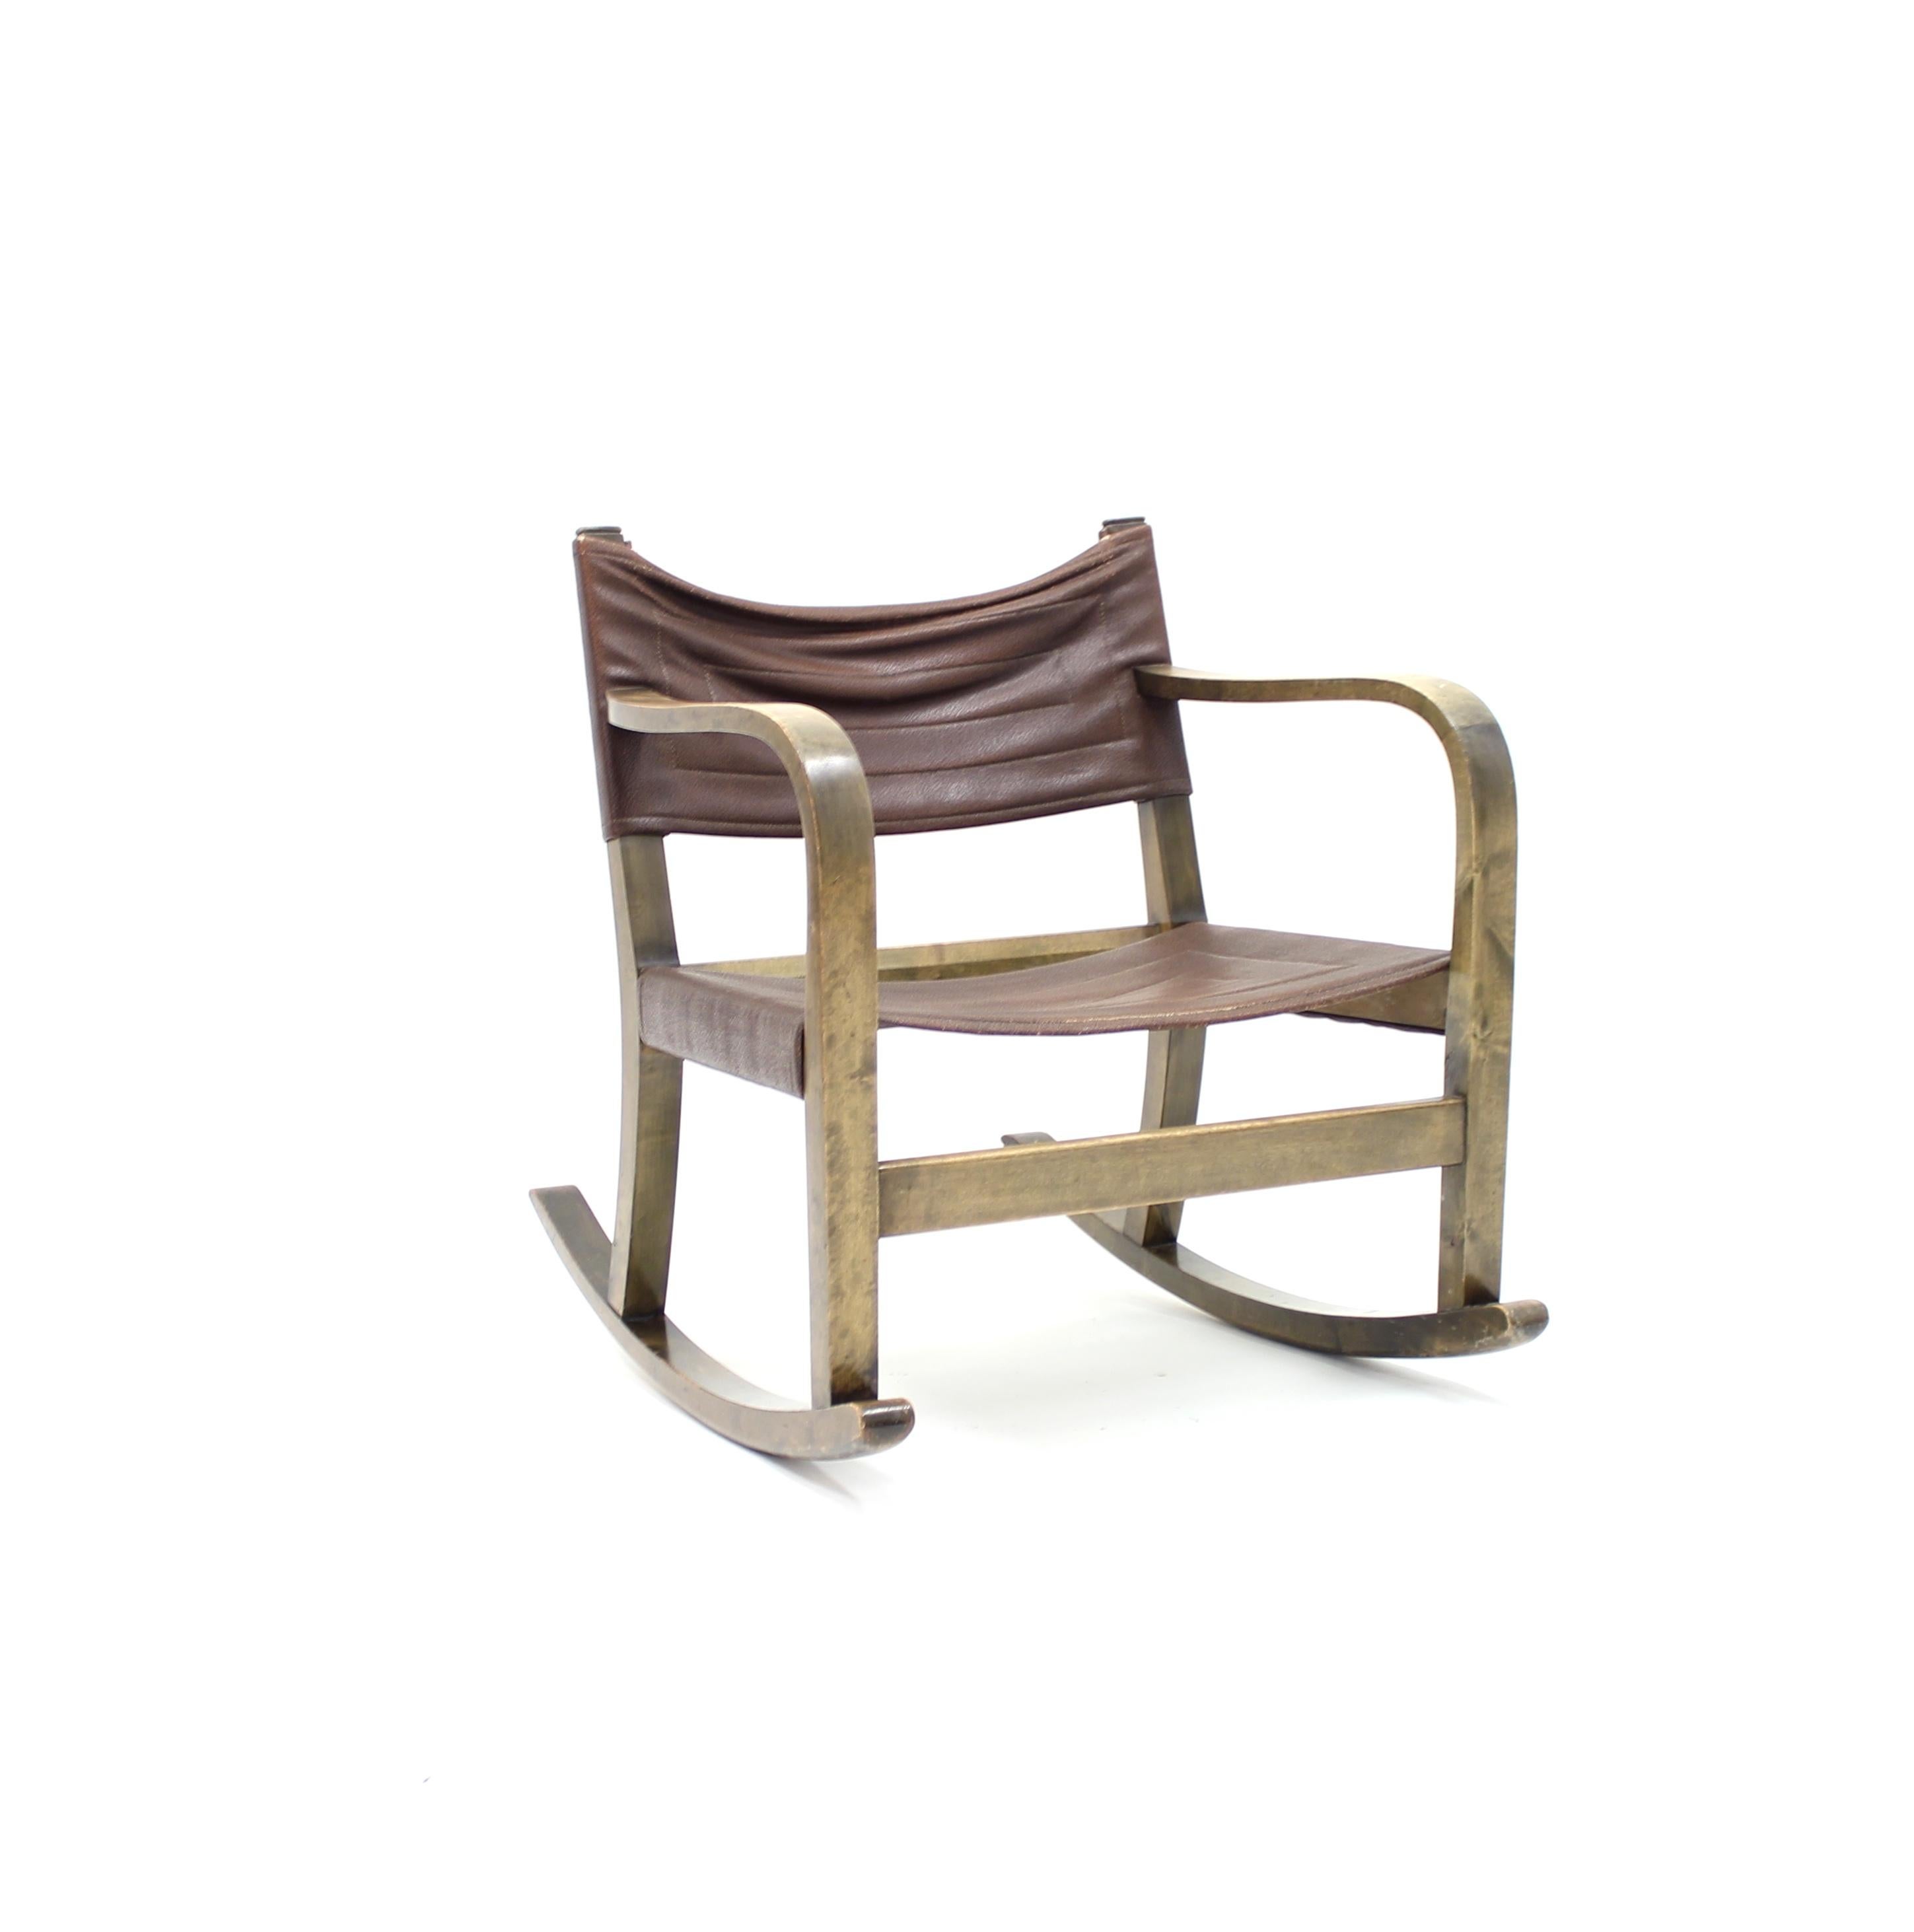 Diminutive Art Deco rocking chair designed by Eskil Sundahl for Swedish manufacturer SMF Bodafors in the 1930s. Frame made of stained birch with original Braun faux leather typ (not real faux leather) on seat and back. Very good untouched original